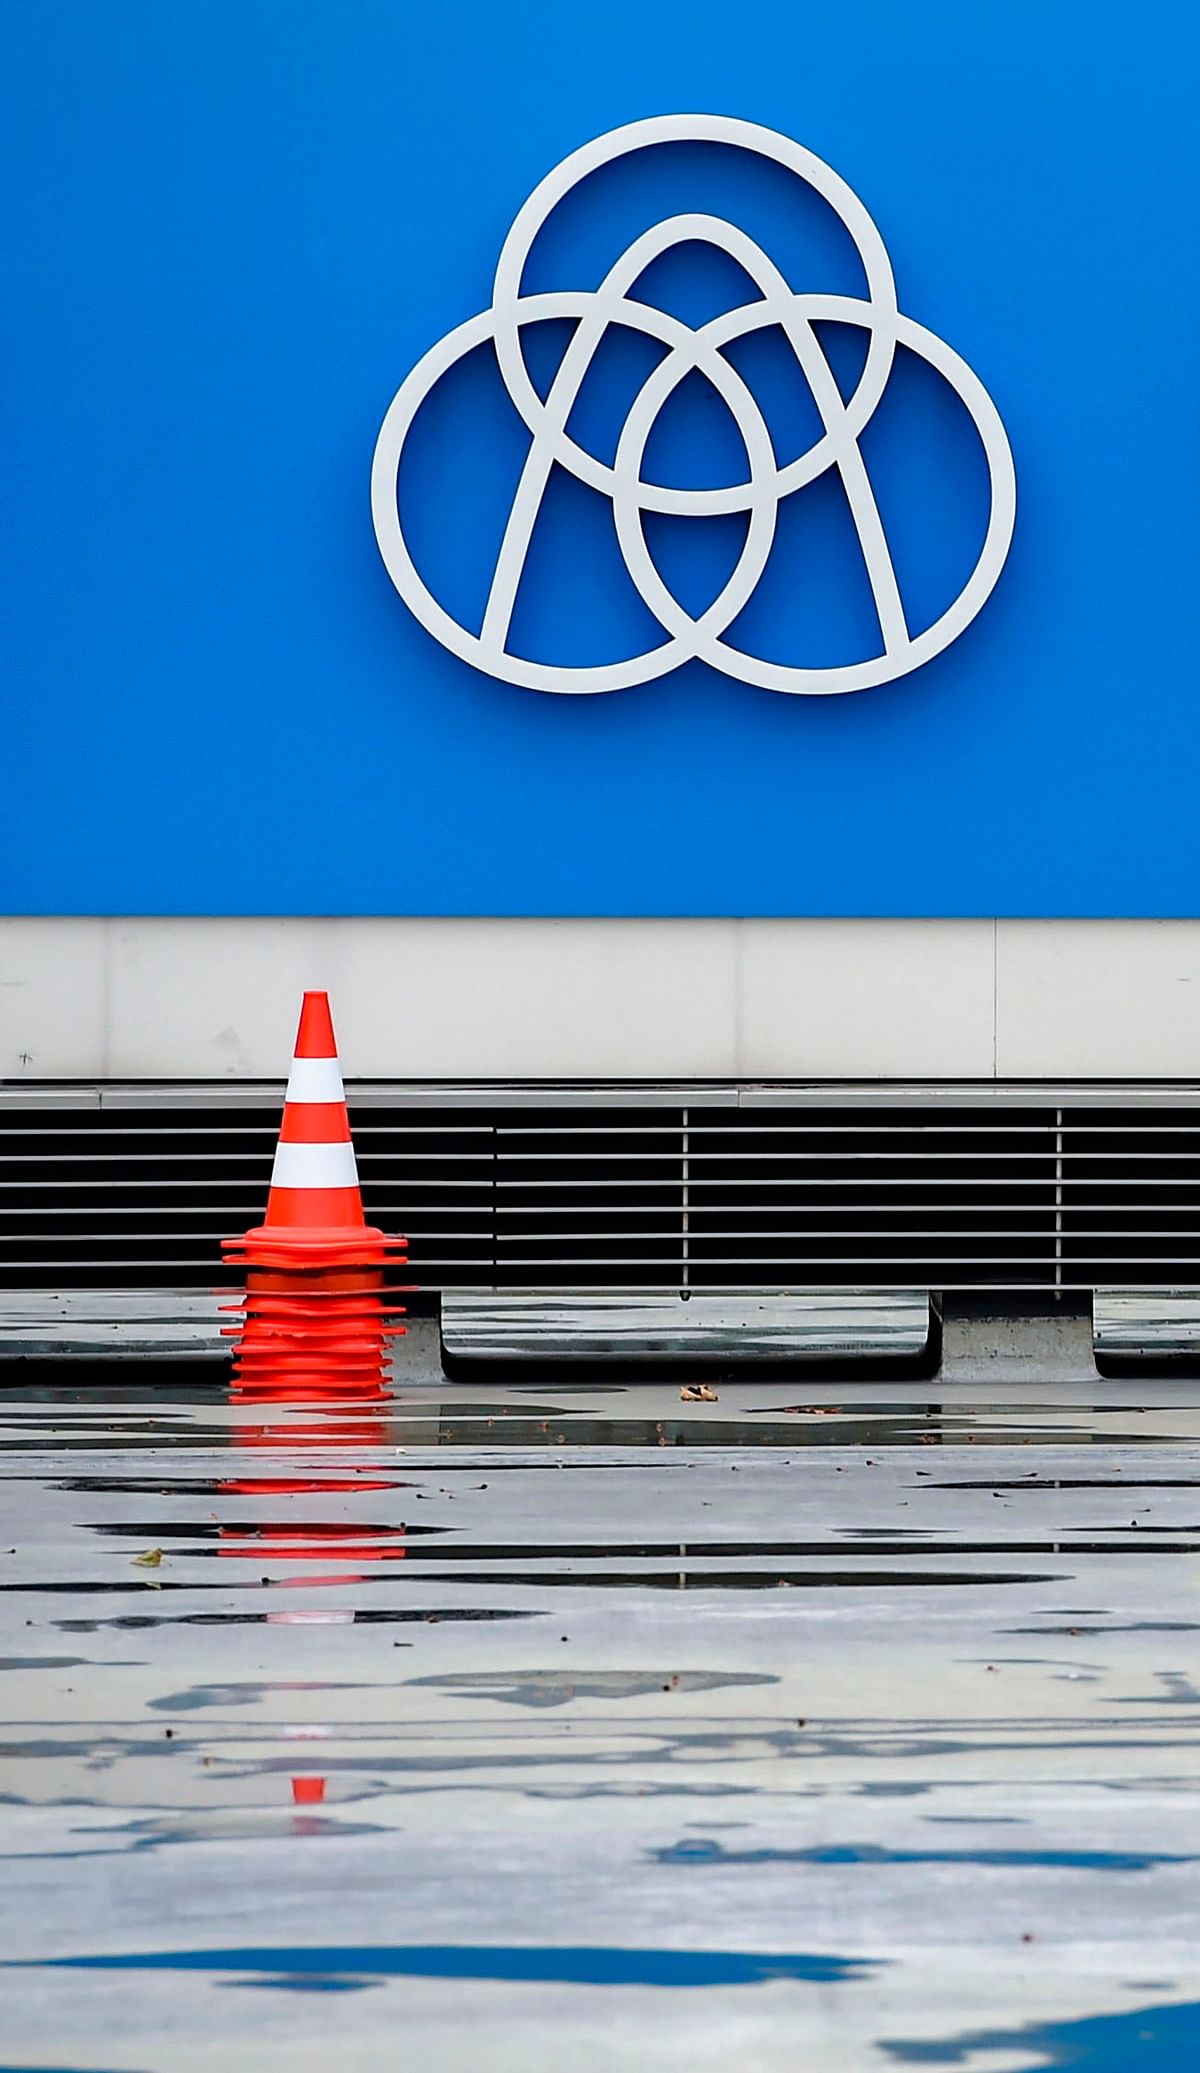 Thyssenkrupp warns of massive Q3 loss as COVID-19 adds to pain